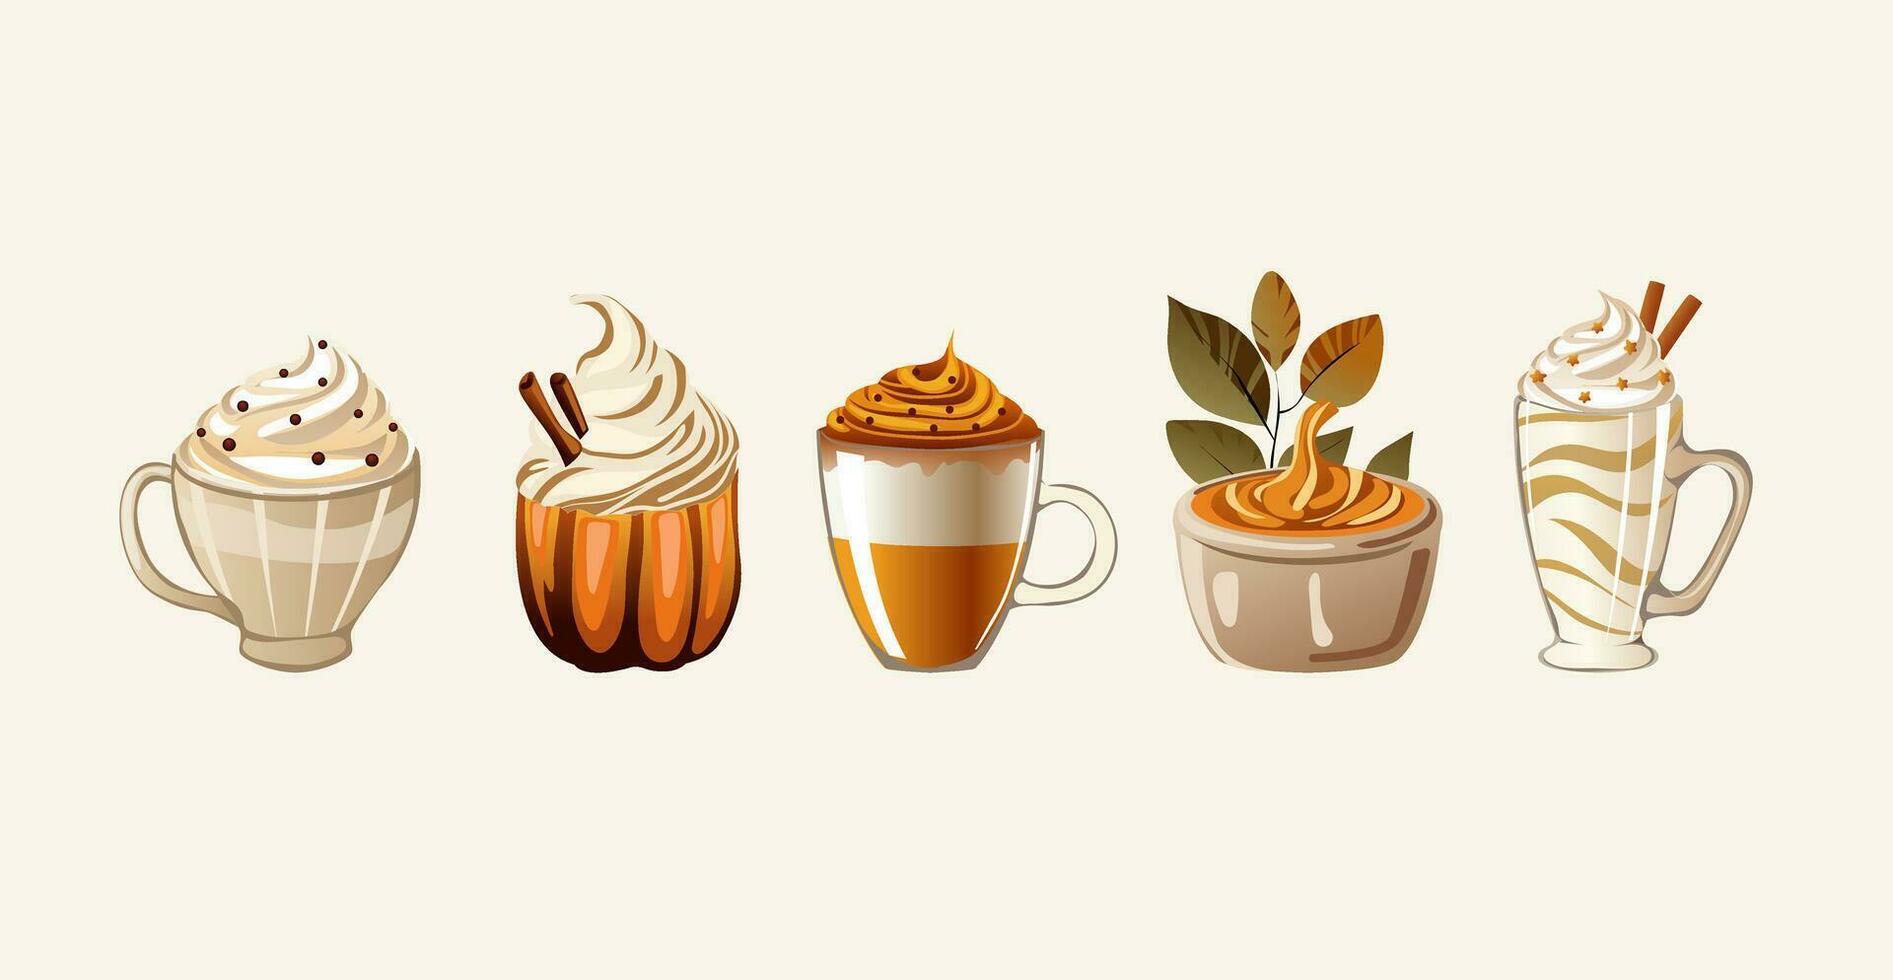 A set of autumn drinks and desserts. Can be used for advertising autumn-themed cafes or restaurants, Creating promotional materials for seasonal menus. Vector illustration.